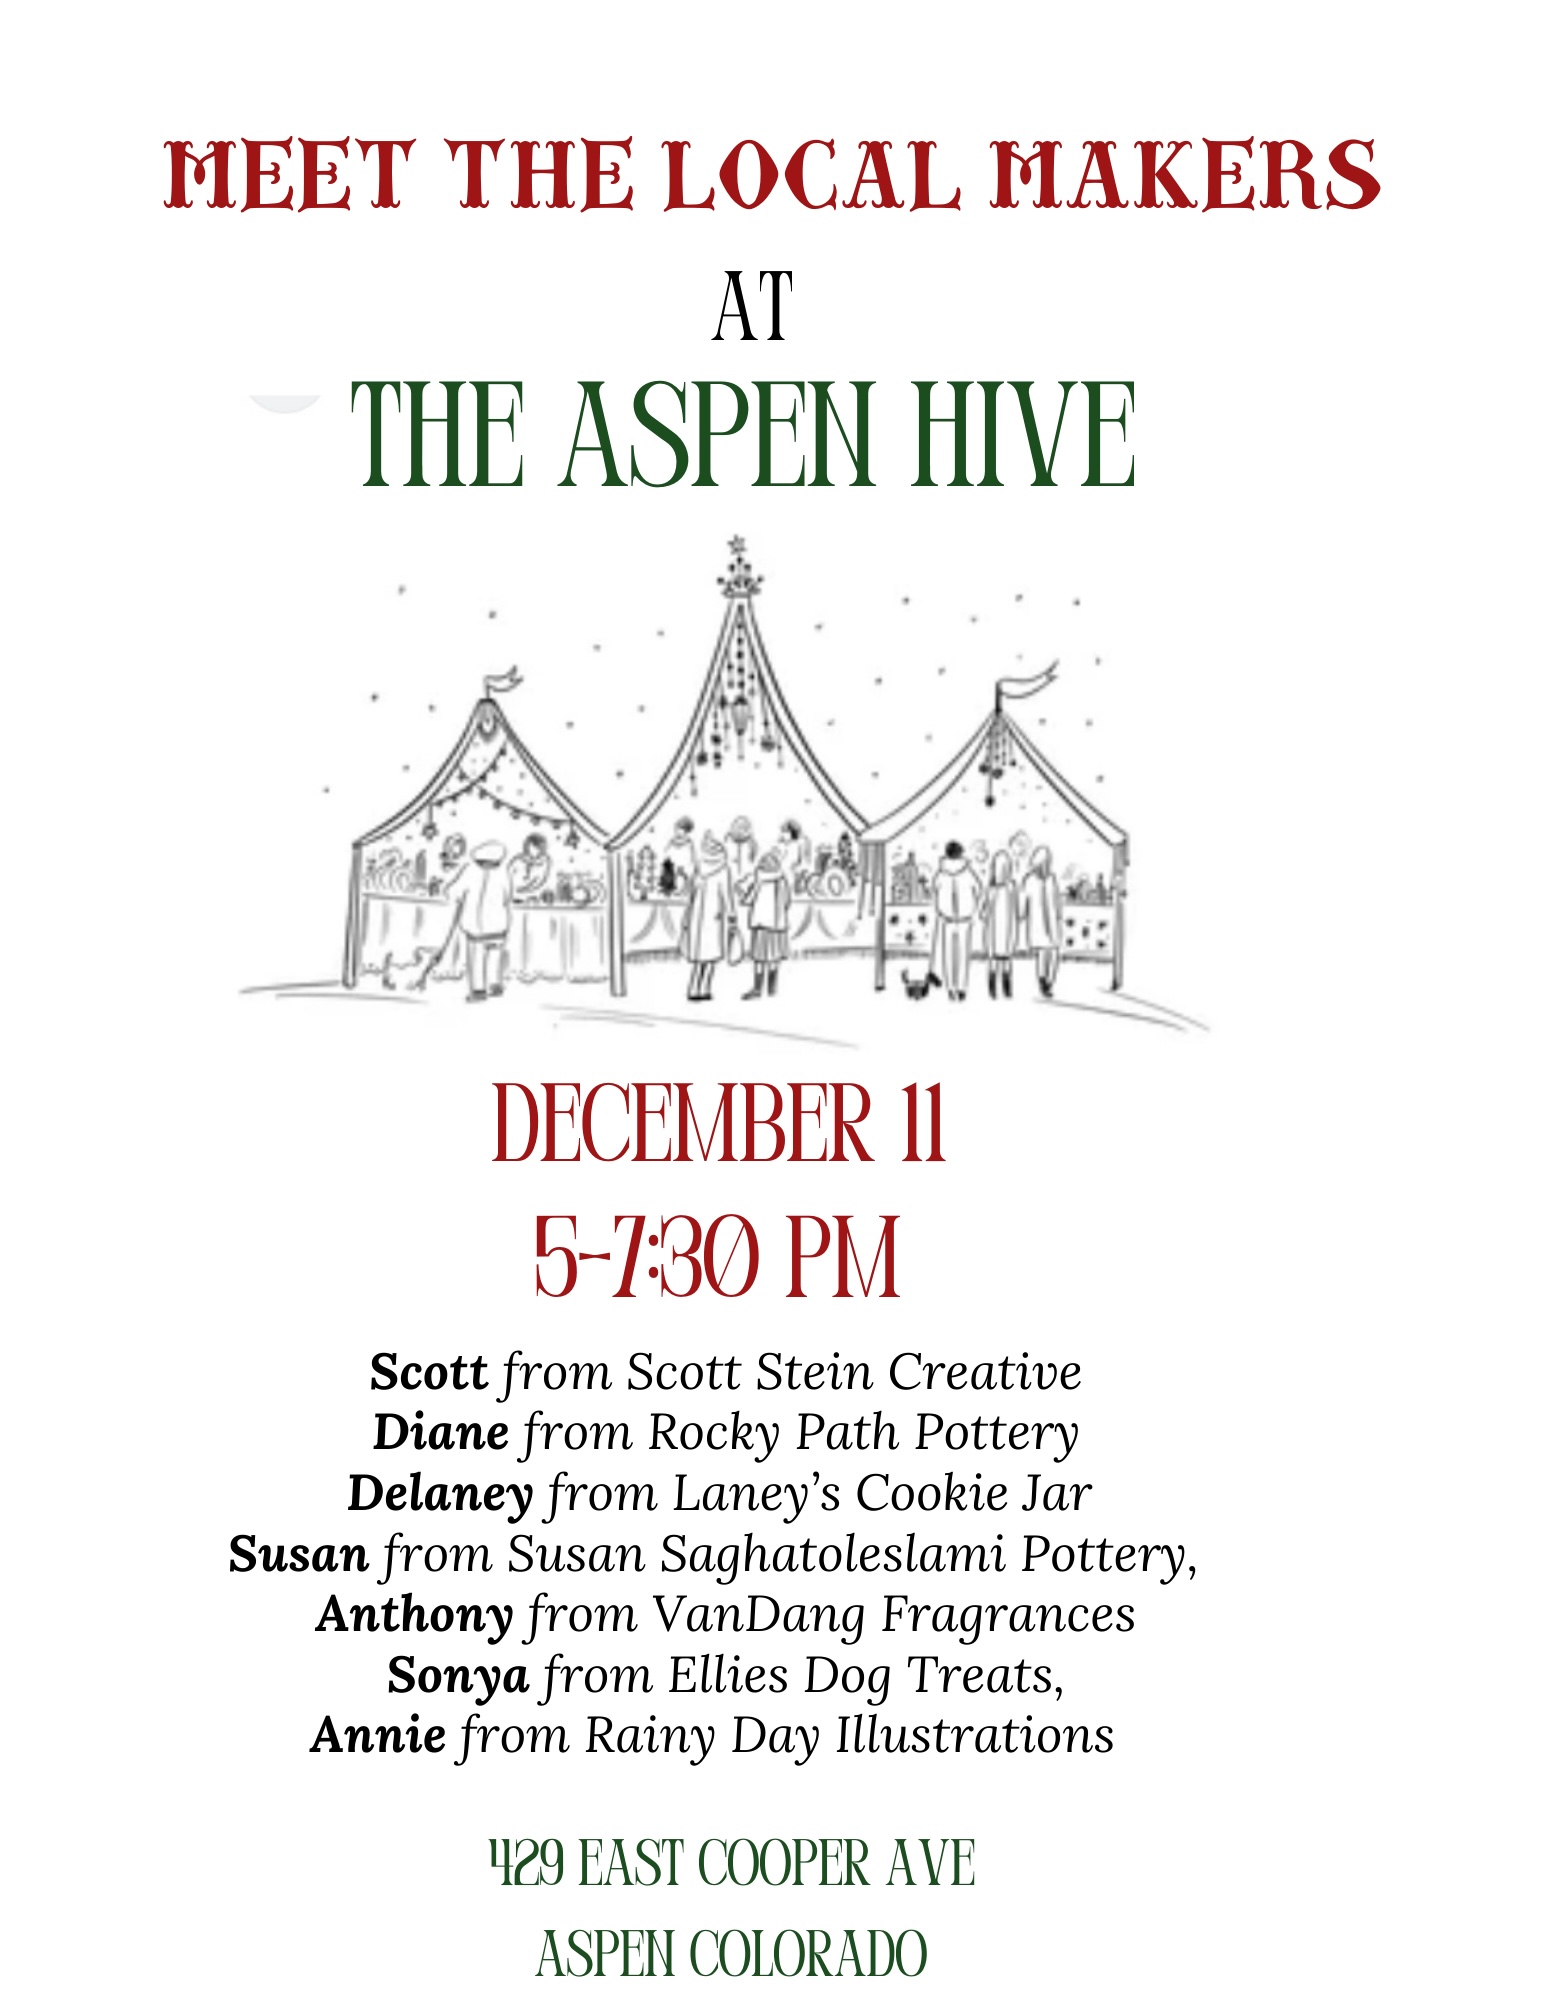 The Aspen Hive event for local artists to display their creations